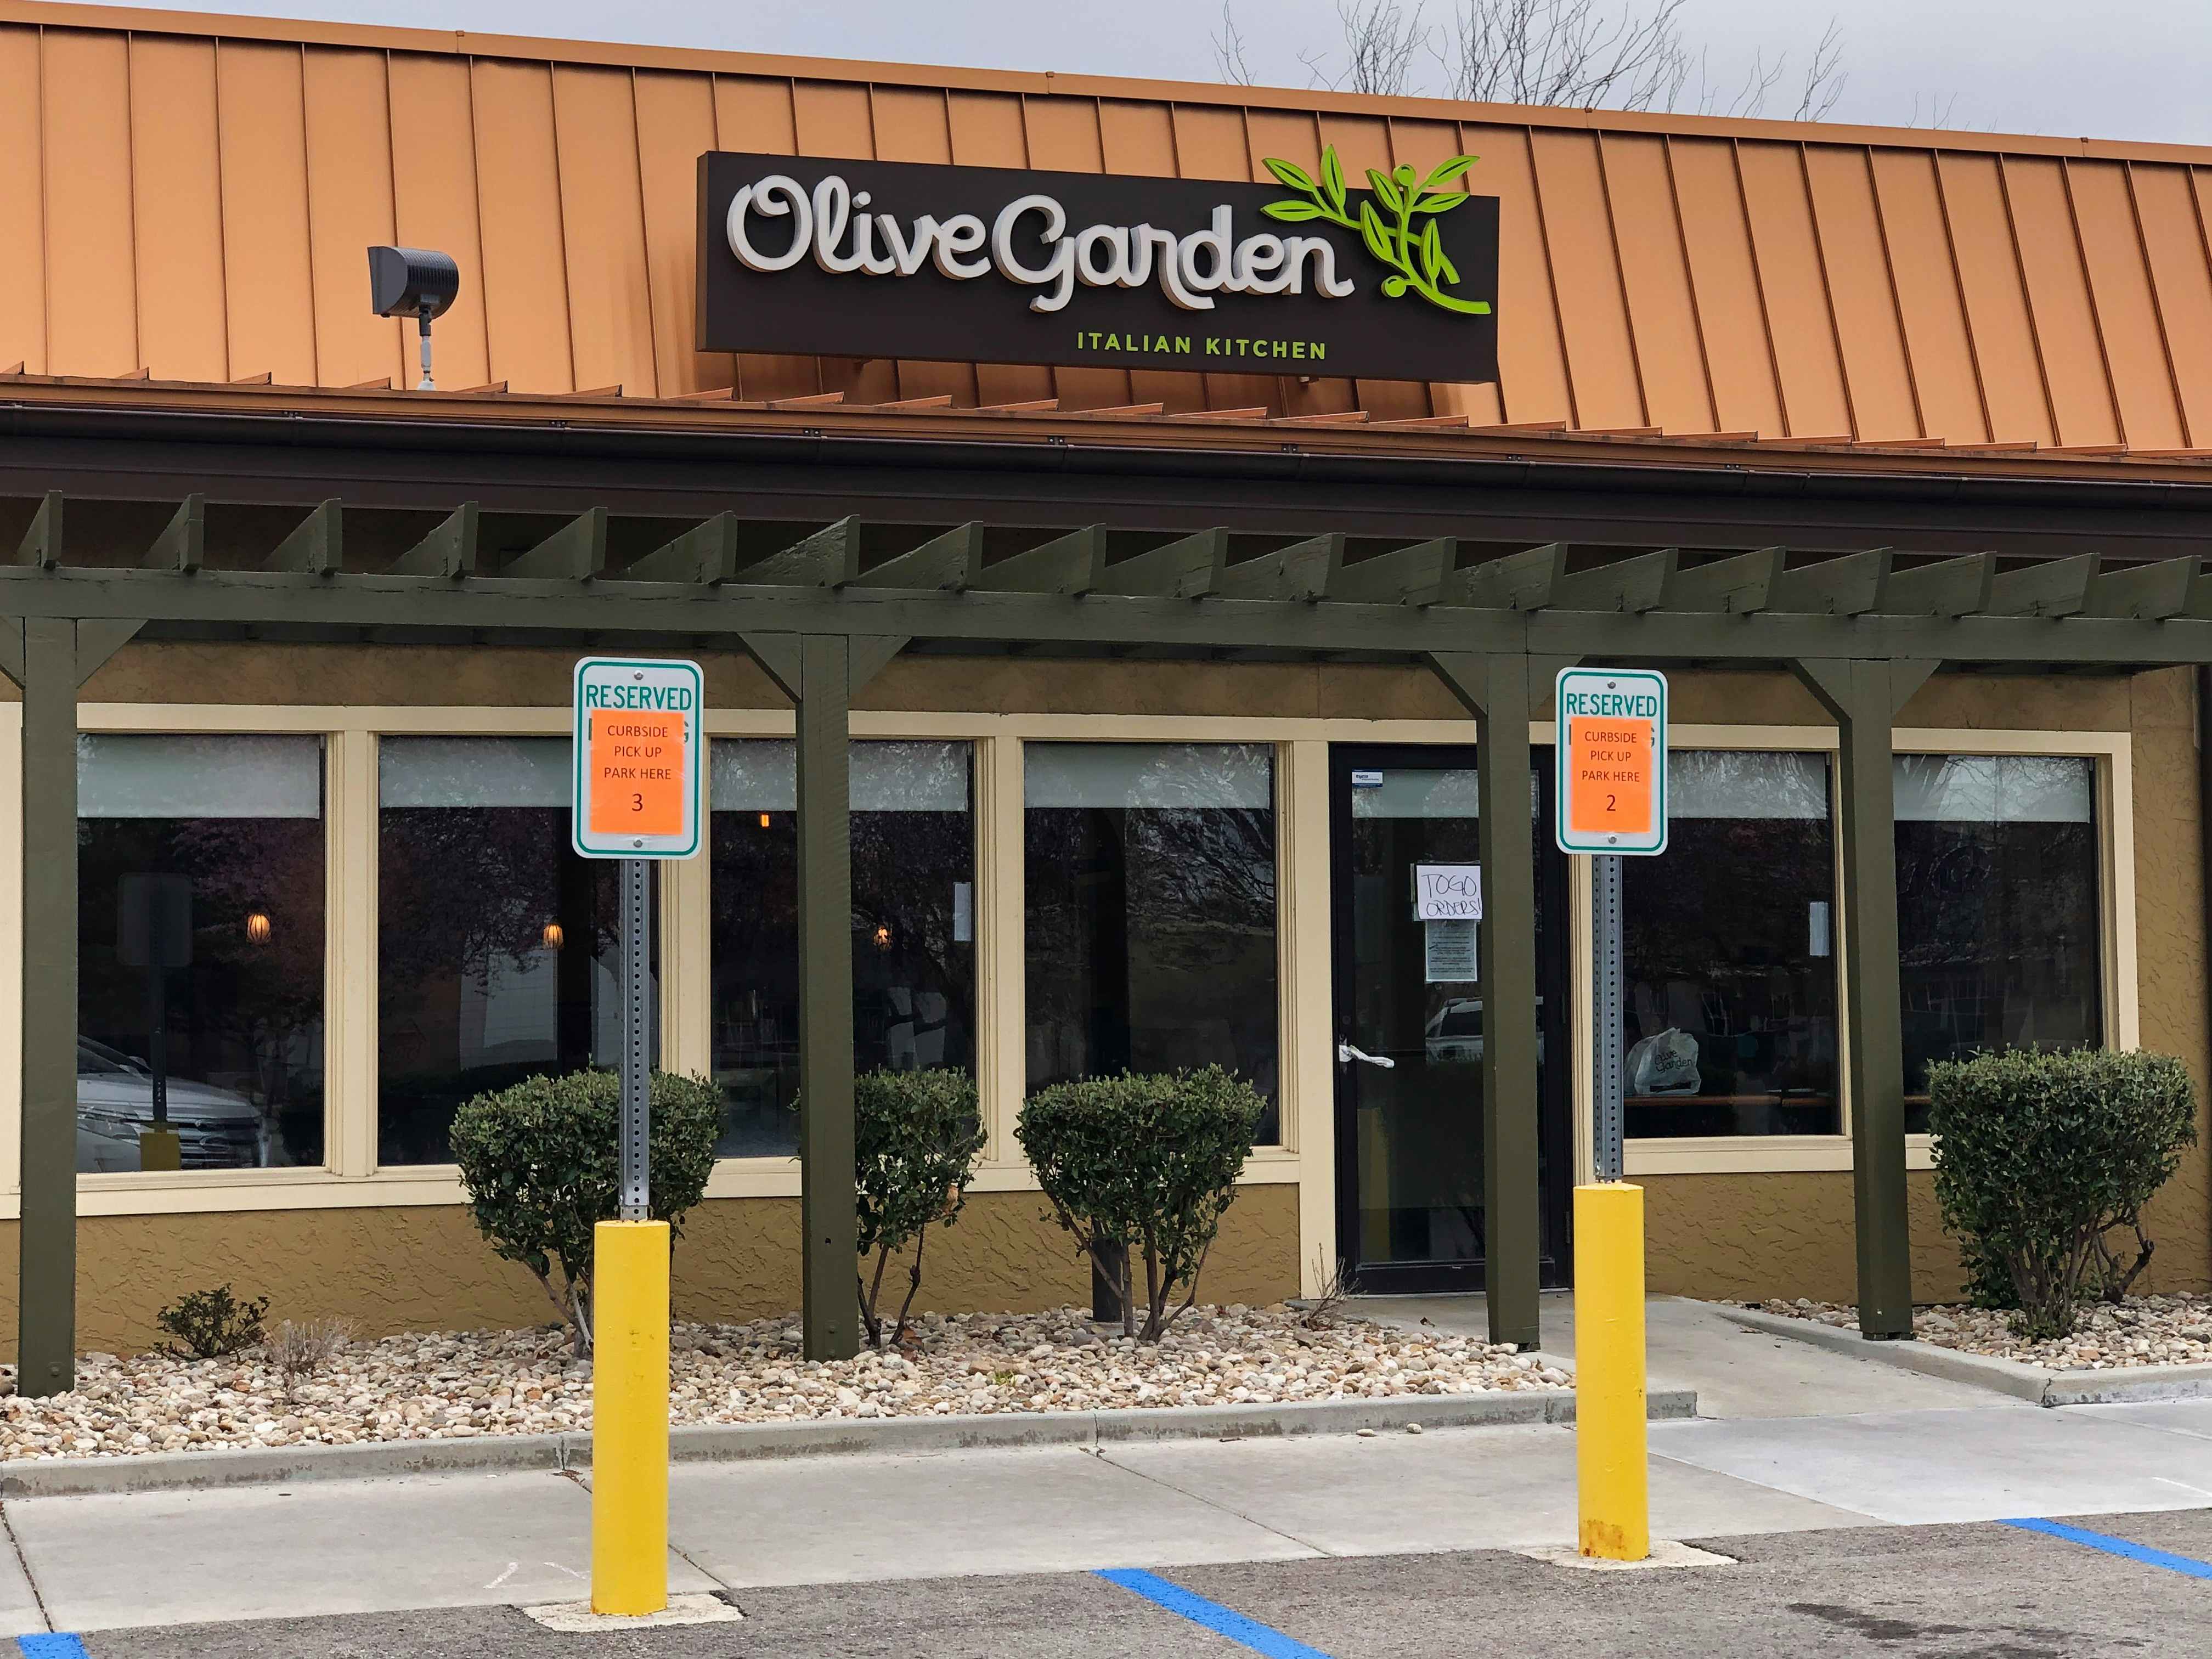 Olive Garden curbside drop-off during the coronavirus outbreak.